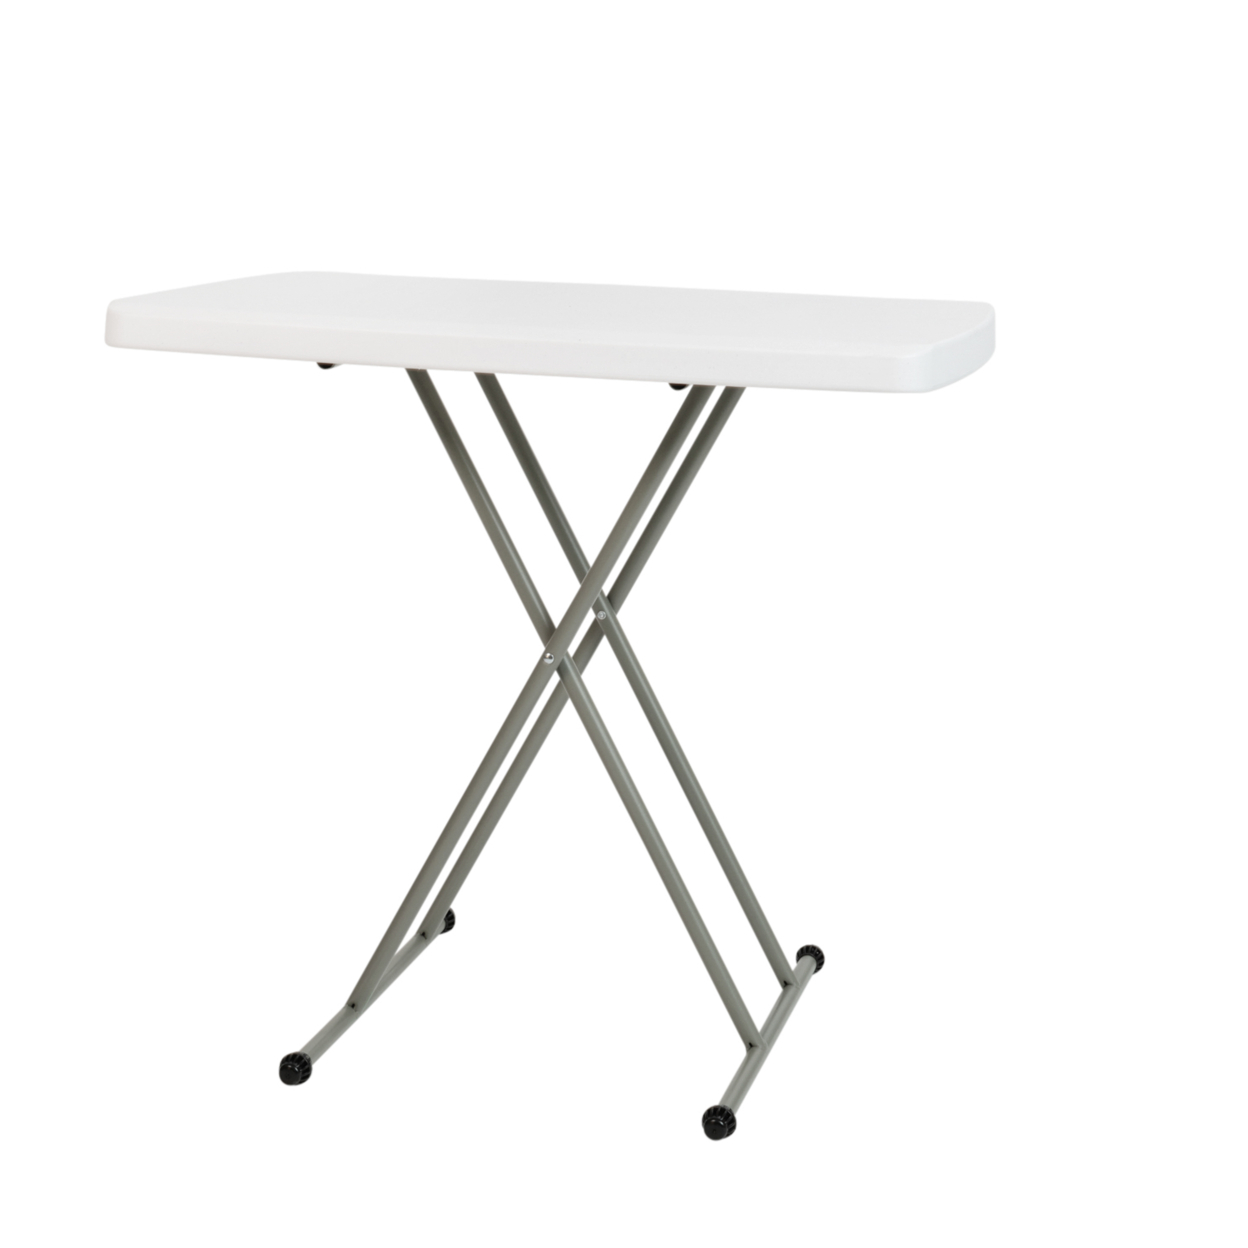 30 Inch Granite White Indoor Or Outdoor Plastic Folding Table, Adjustable Height Commercial Grade Side Table, Laptop Table, TV Tray